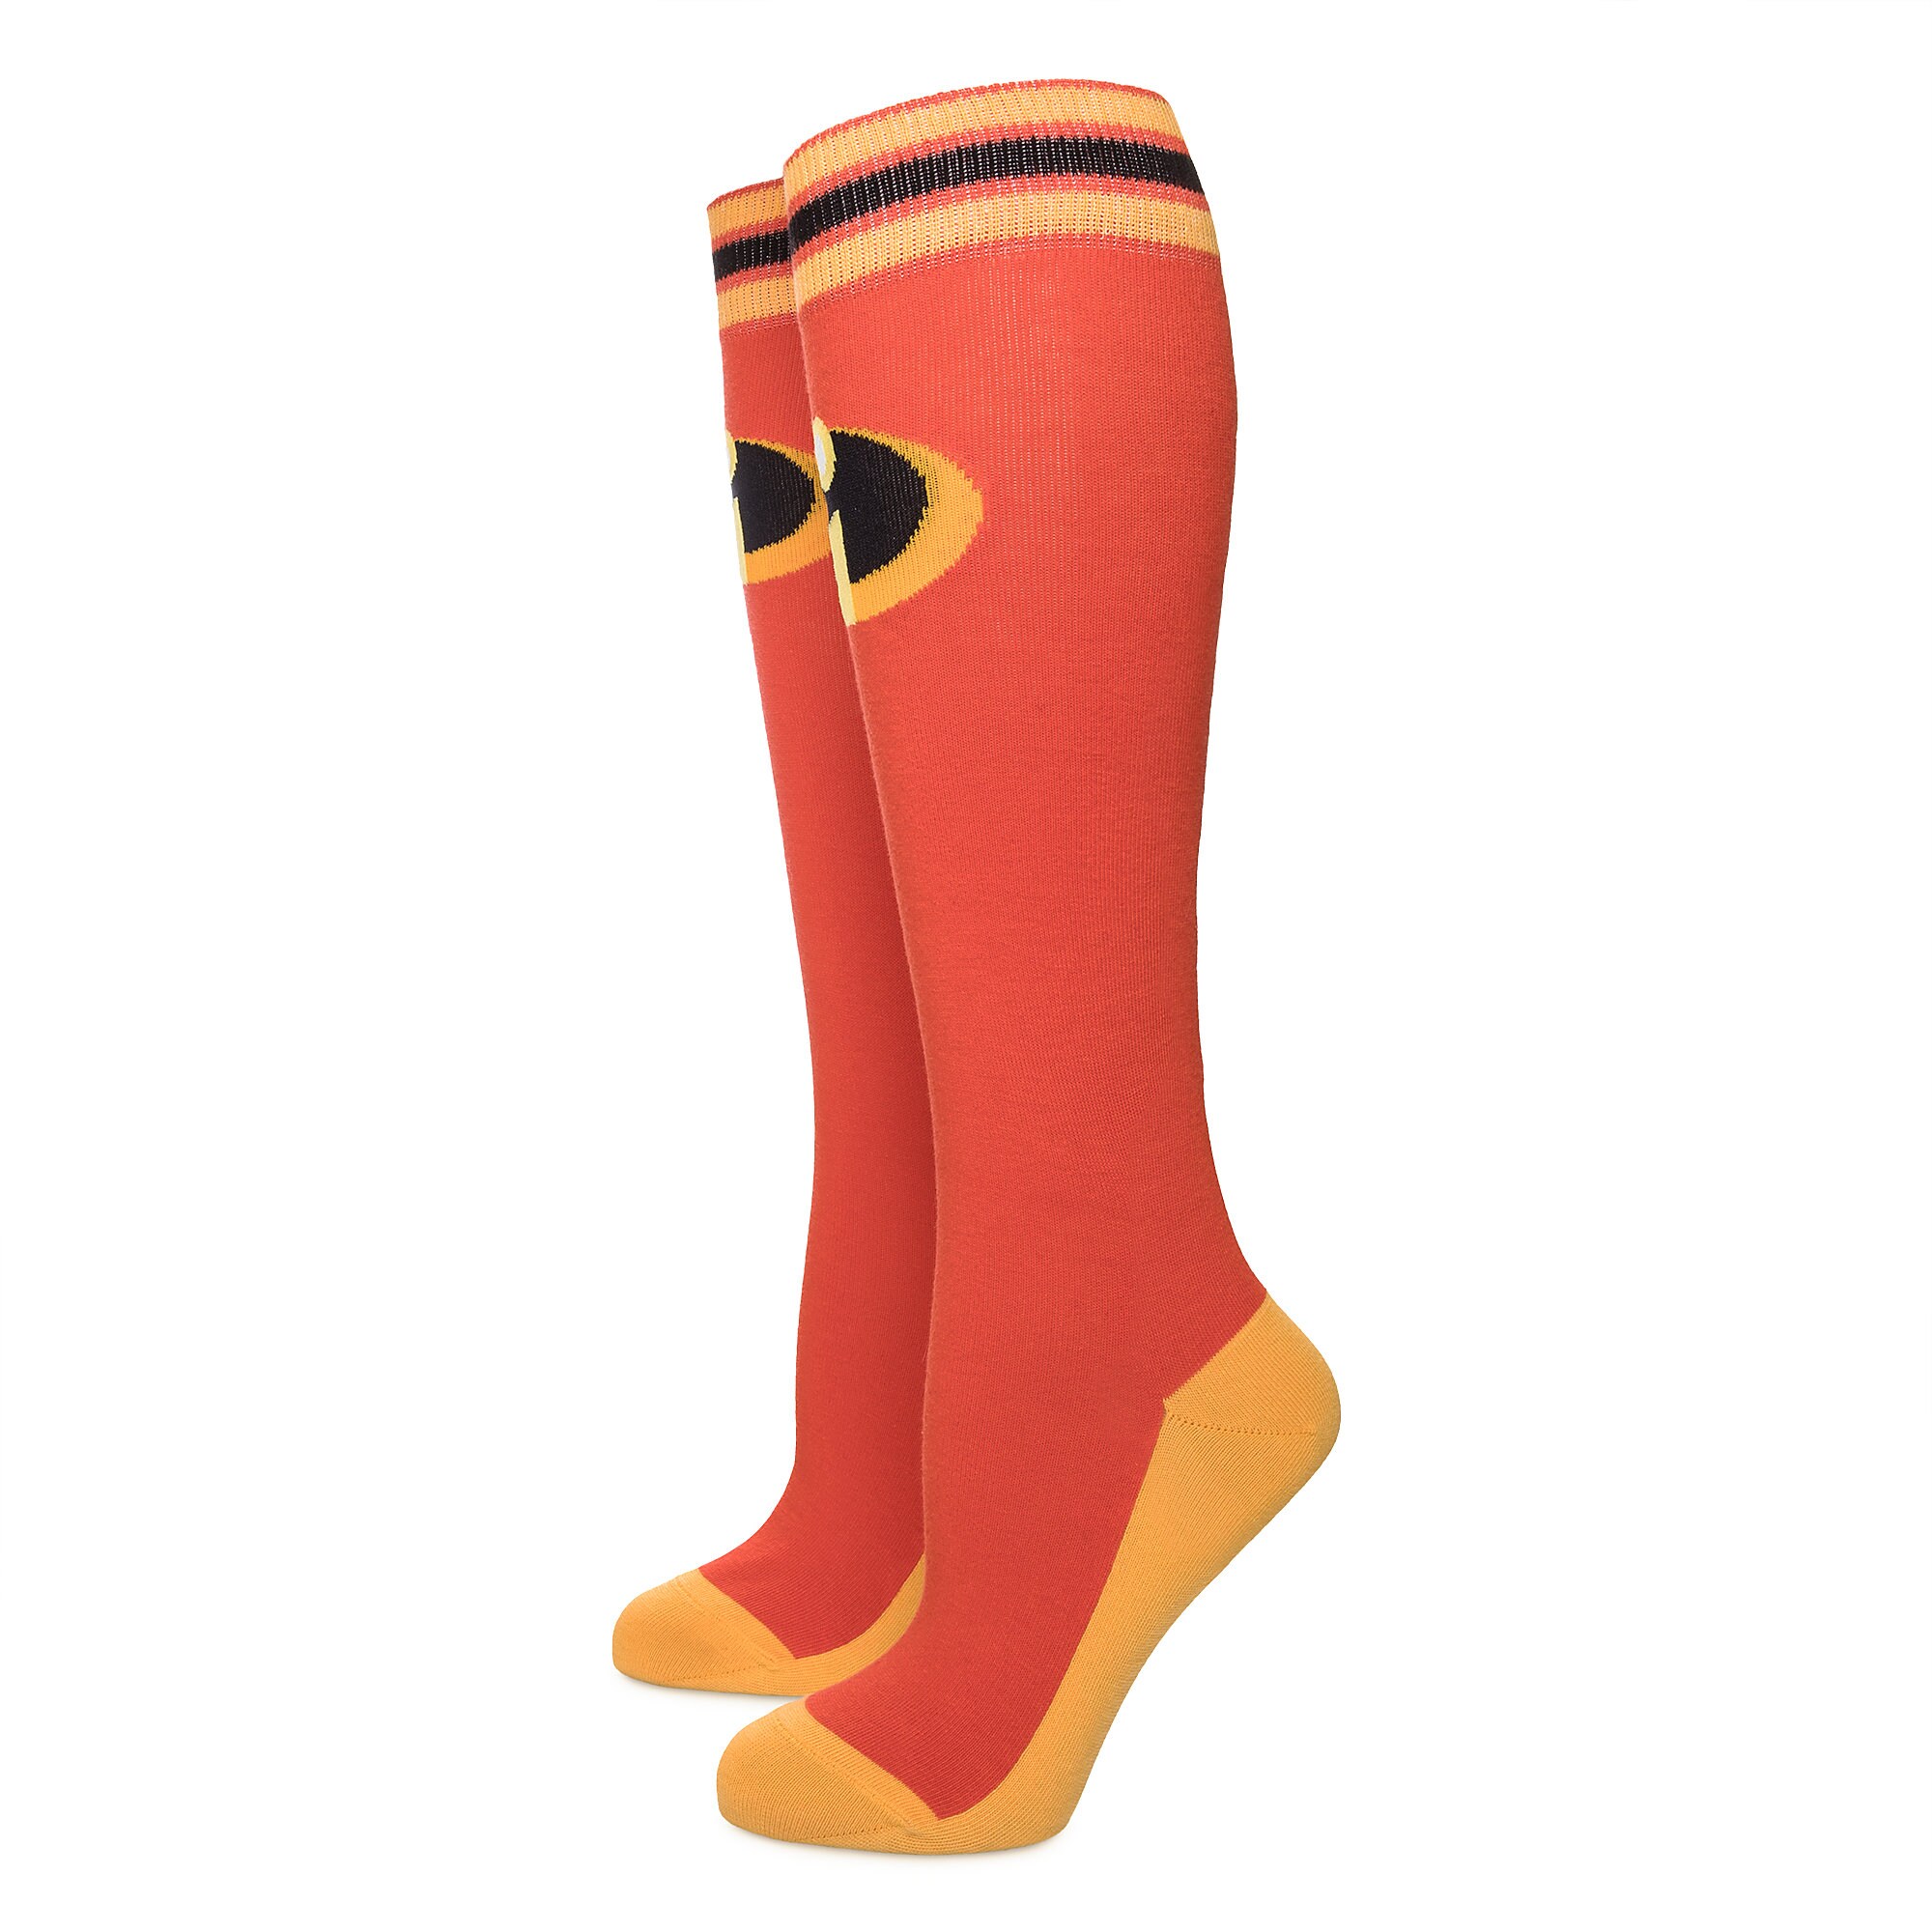 Incredibles Socks for Adults